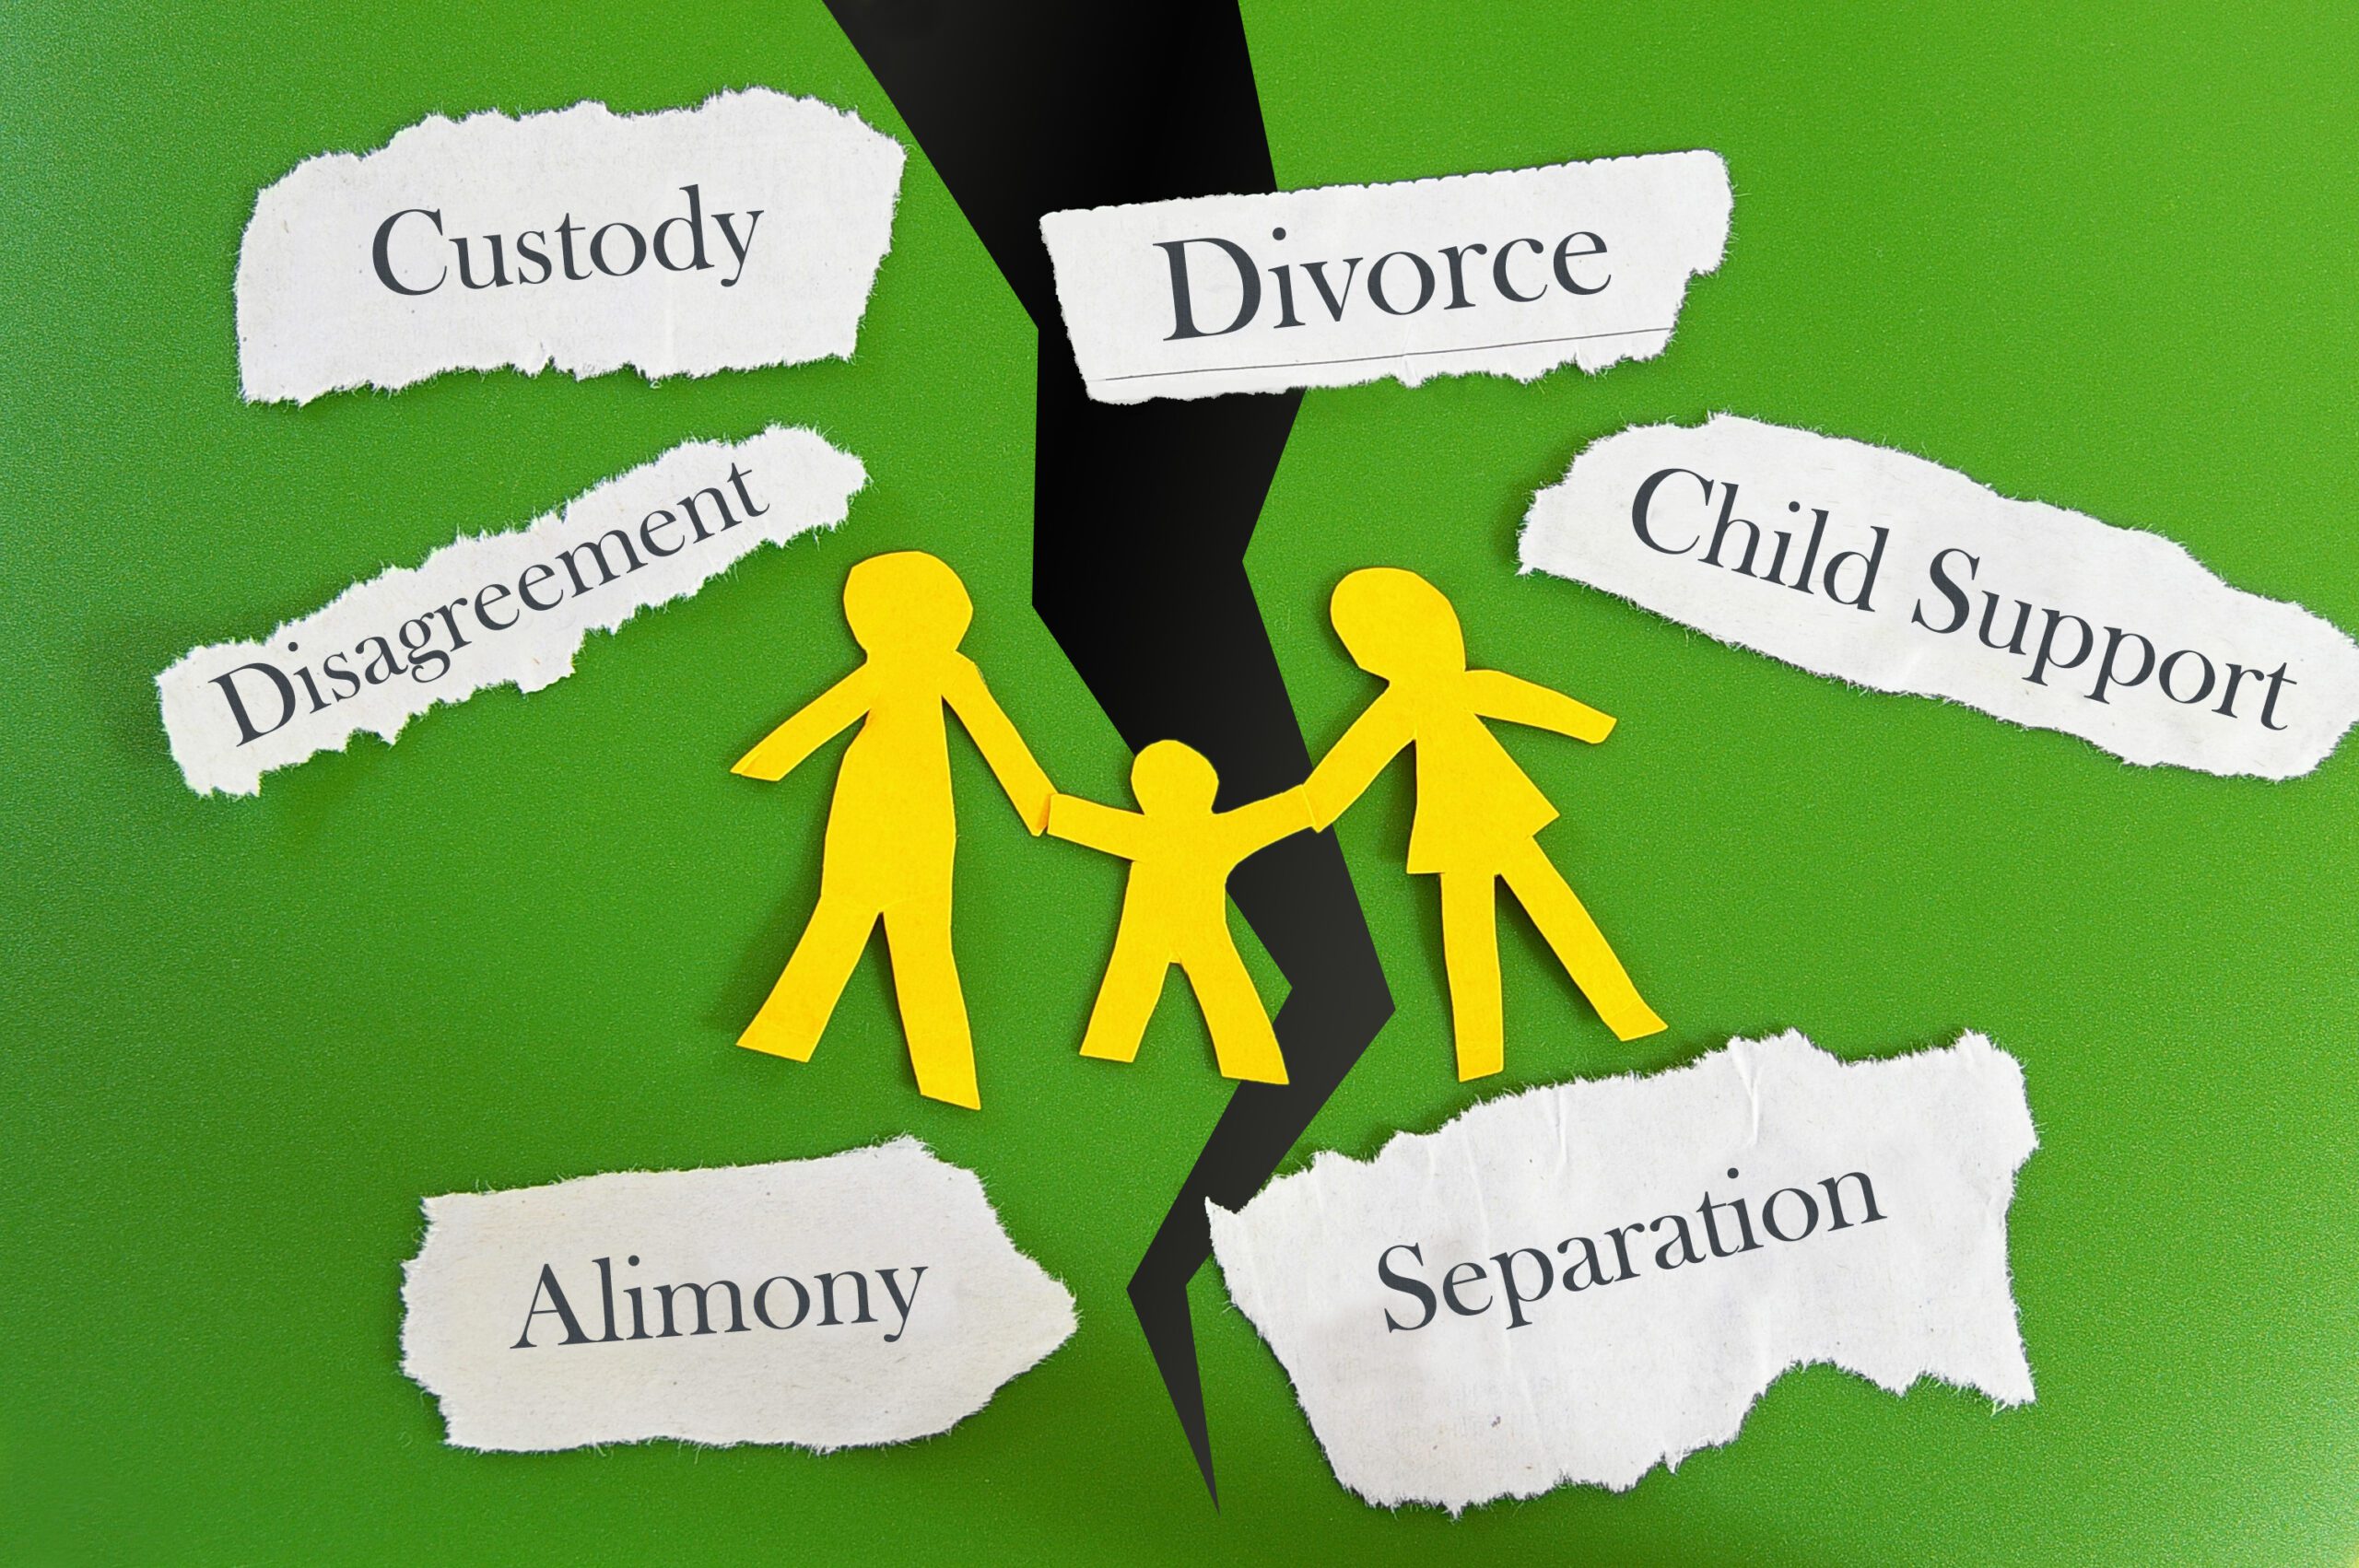 How Is Alimony Determined In Shelby, MI?